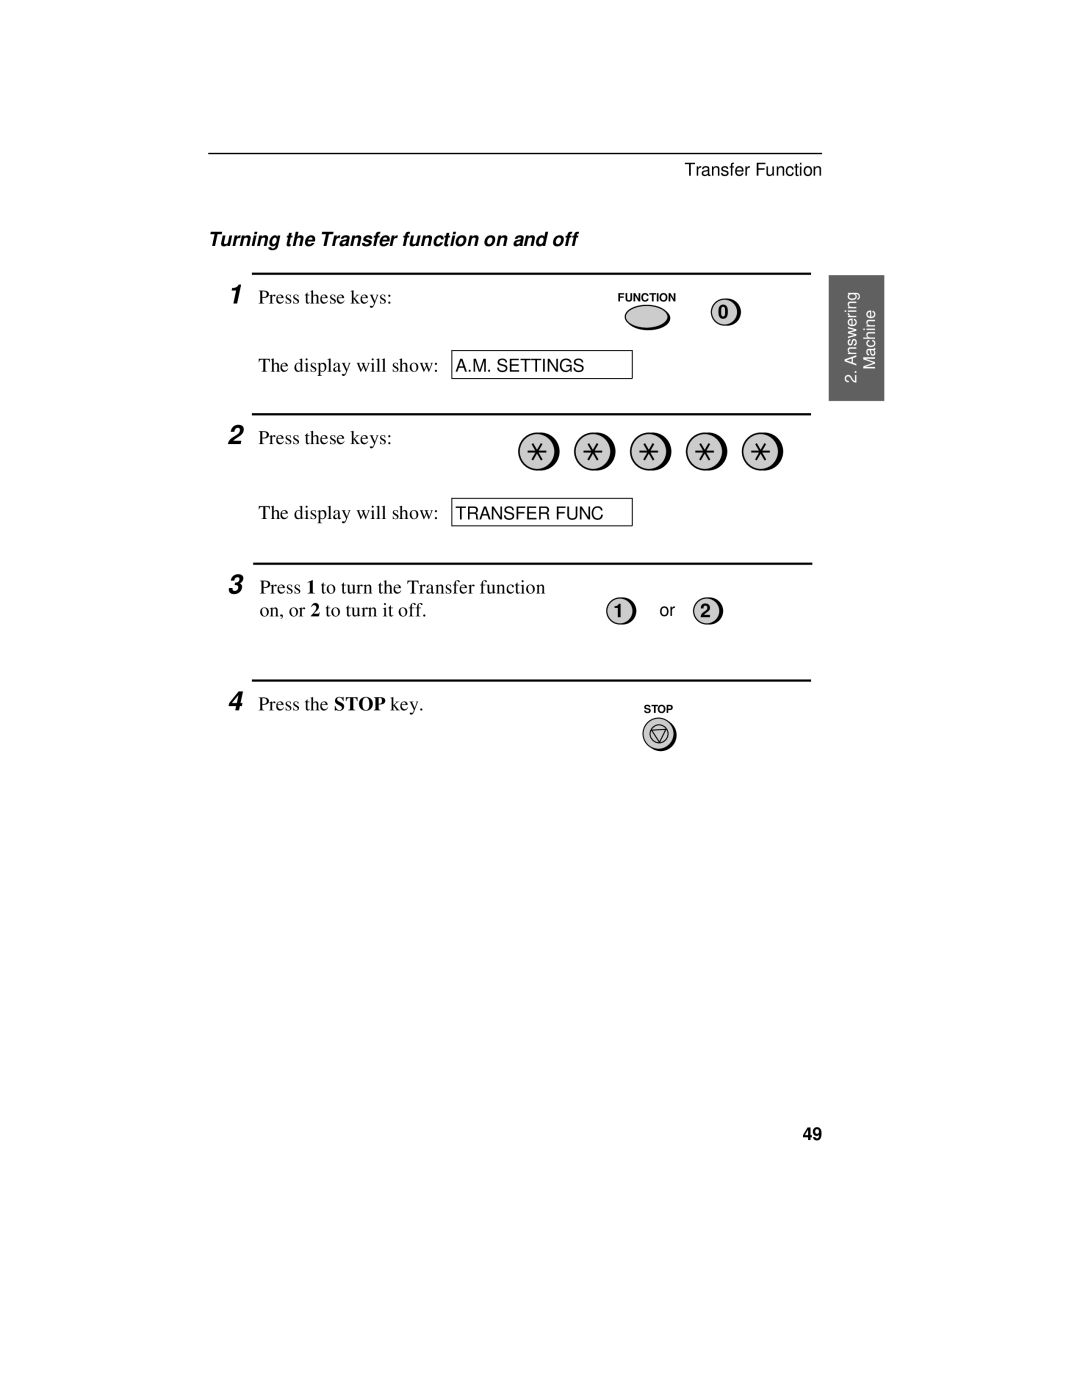 Sharp UX-470 operation manual Turning the Transfer function on and off 